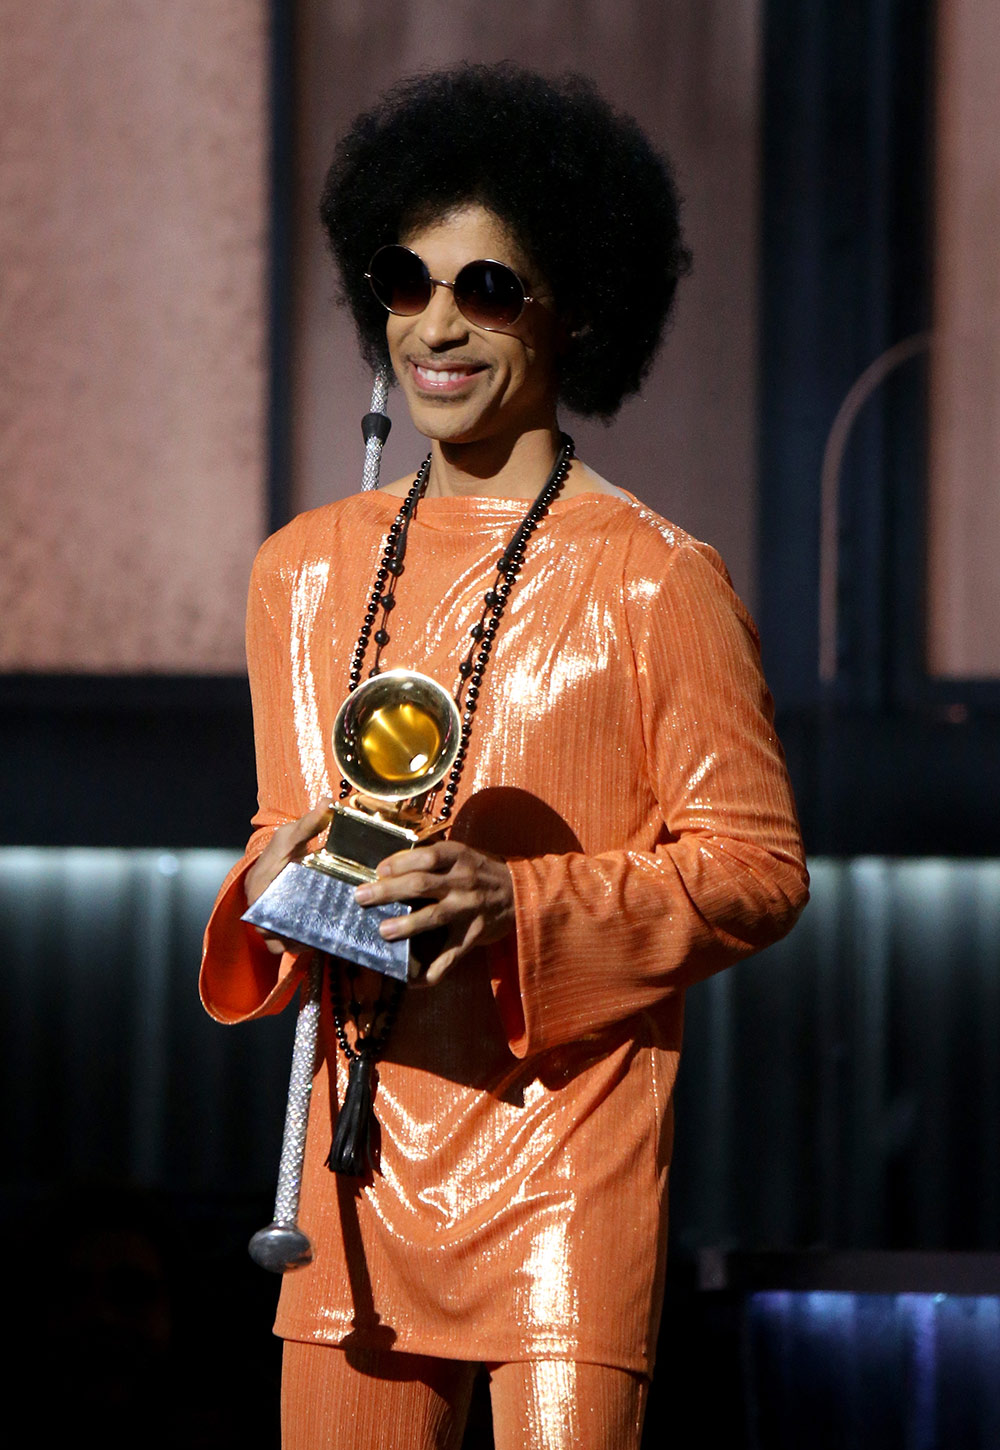 Prince at the 57th Annual Grammy Awards in 2015.